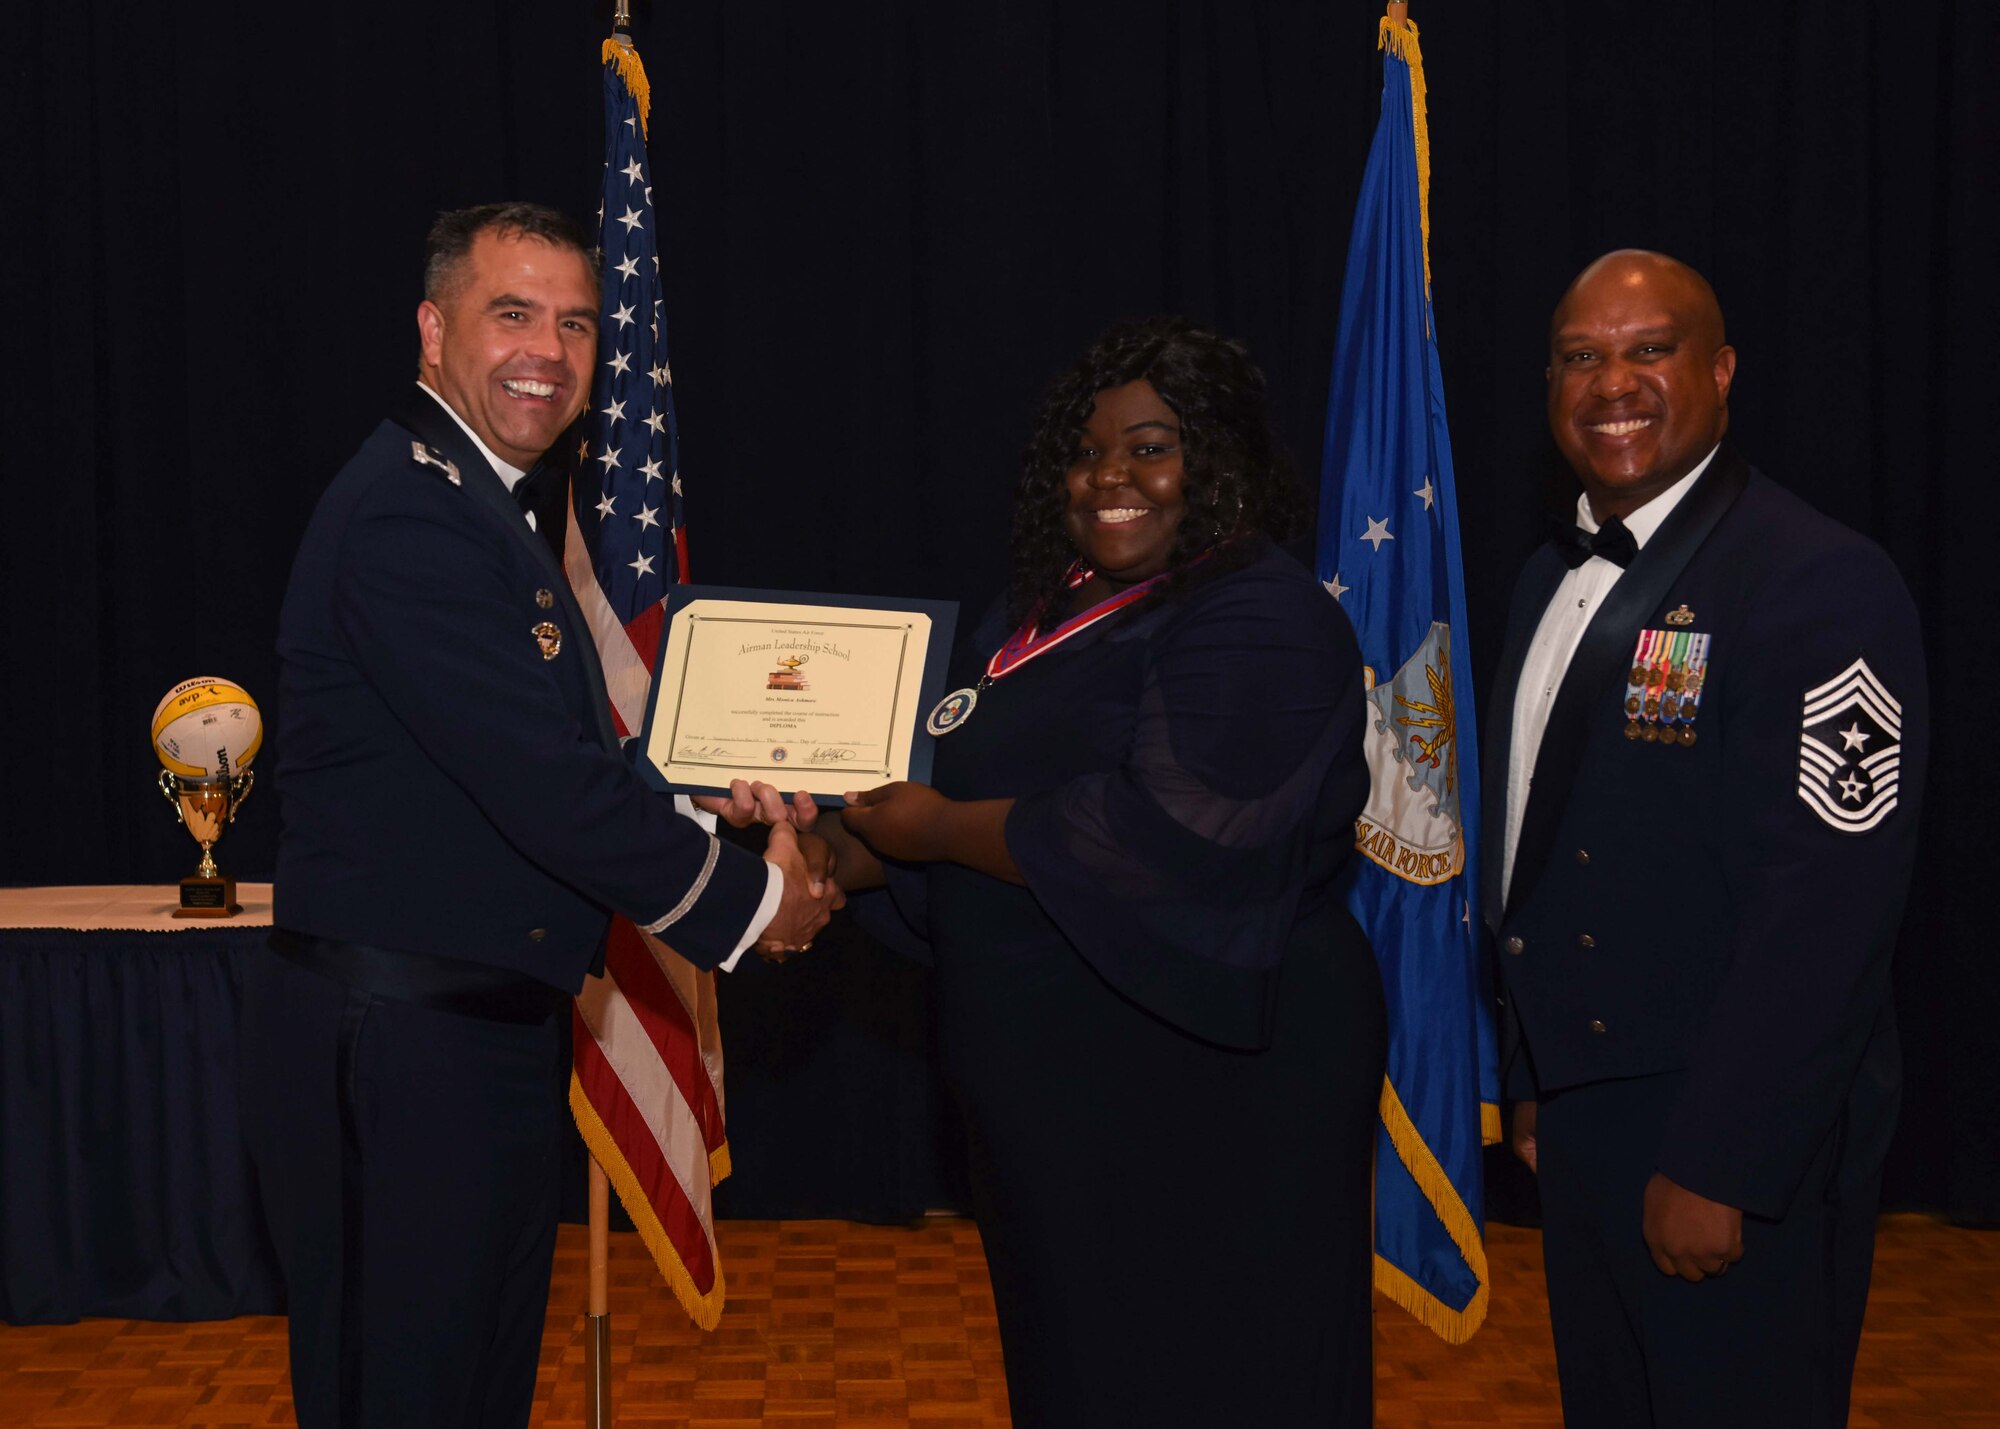 Monica Ashmore, 30th Force Support Squadron lodging assistant manager, receives a certificate during her Airman Leadership School graduation ceremony Oct. 10, 2019, at Vandenberg Air Force Base, Calif. Ashmore is the first civilian to graduate from the Vandenberg Airman Leadership School. The school is a five week course designed to develop Airmen and their civilian counterparts into effective frontline supervisors through group discussion, unit-cohesion activities, physical training and other leadership development curriculum. (U.S. Air Force photo by Airman 1st Class Aubree Milks)